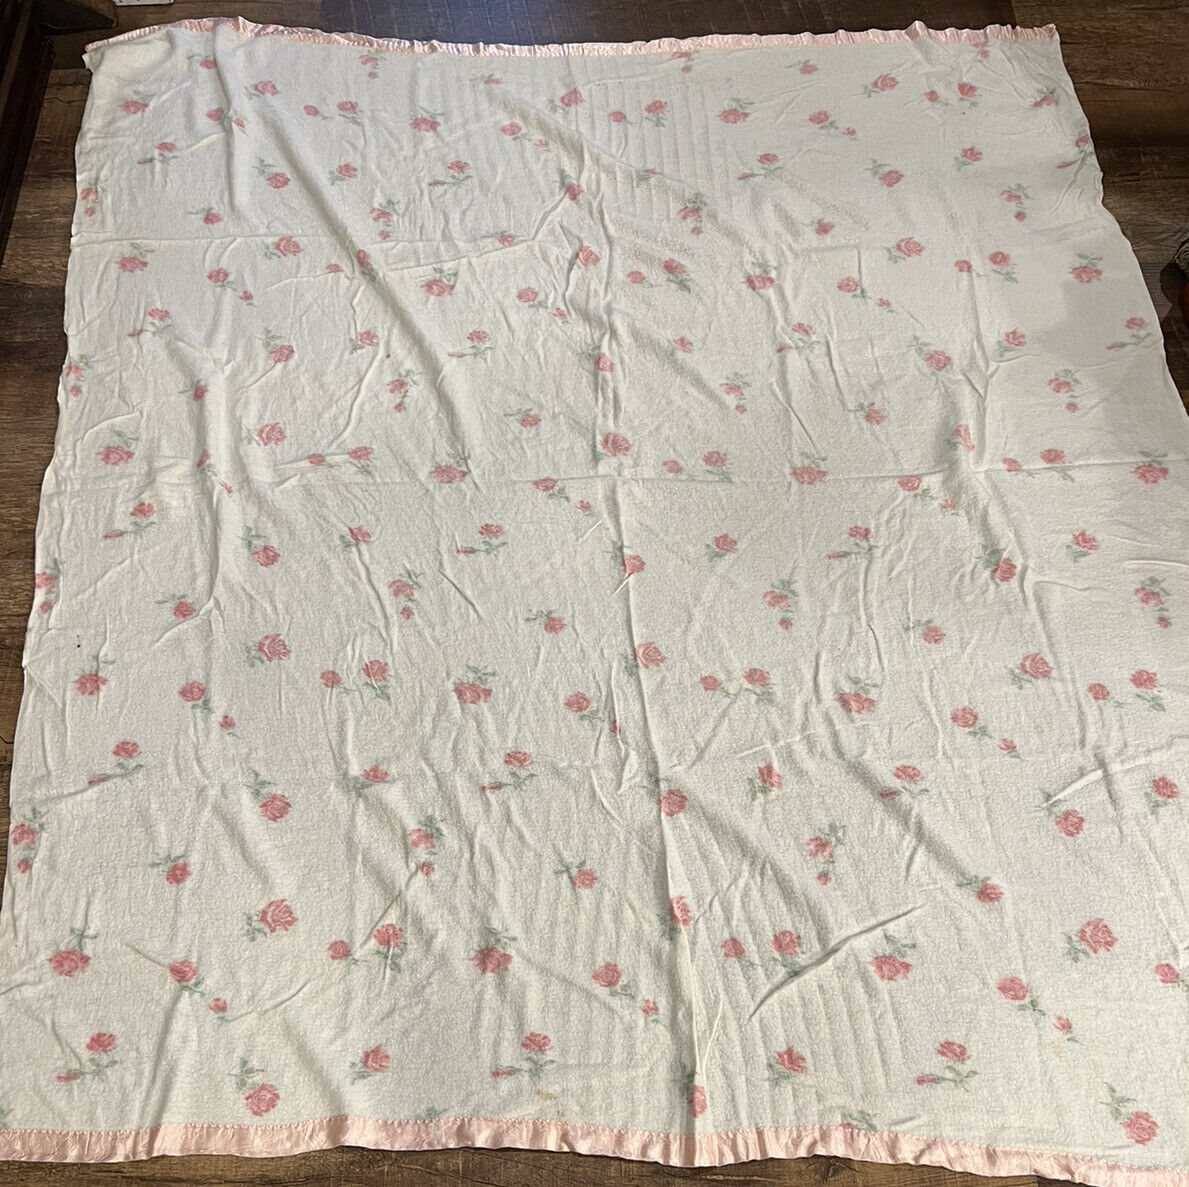 Flannel Rose Blanket Satin Edge Vintage White Pink 68x73 Soft Classic Full Queen